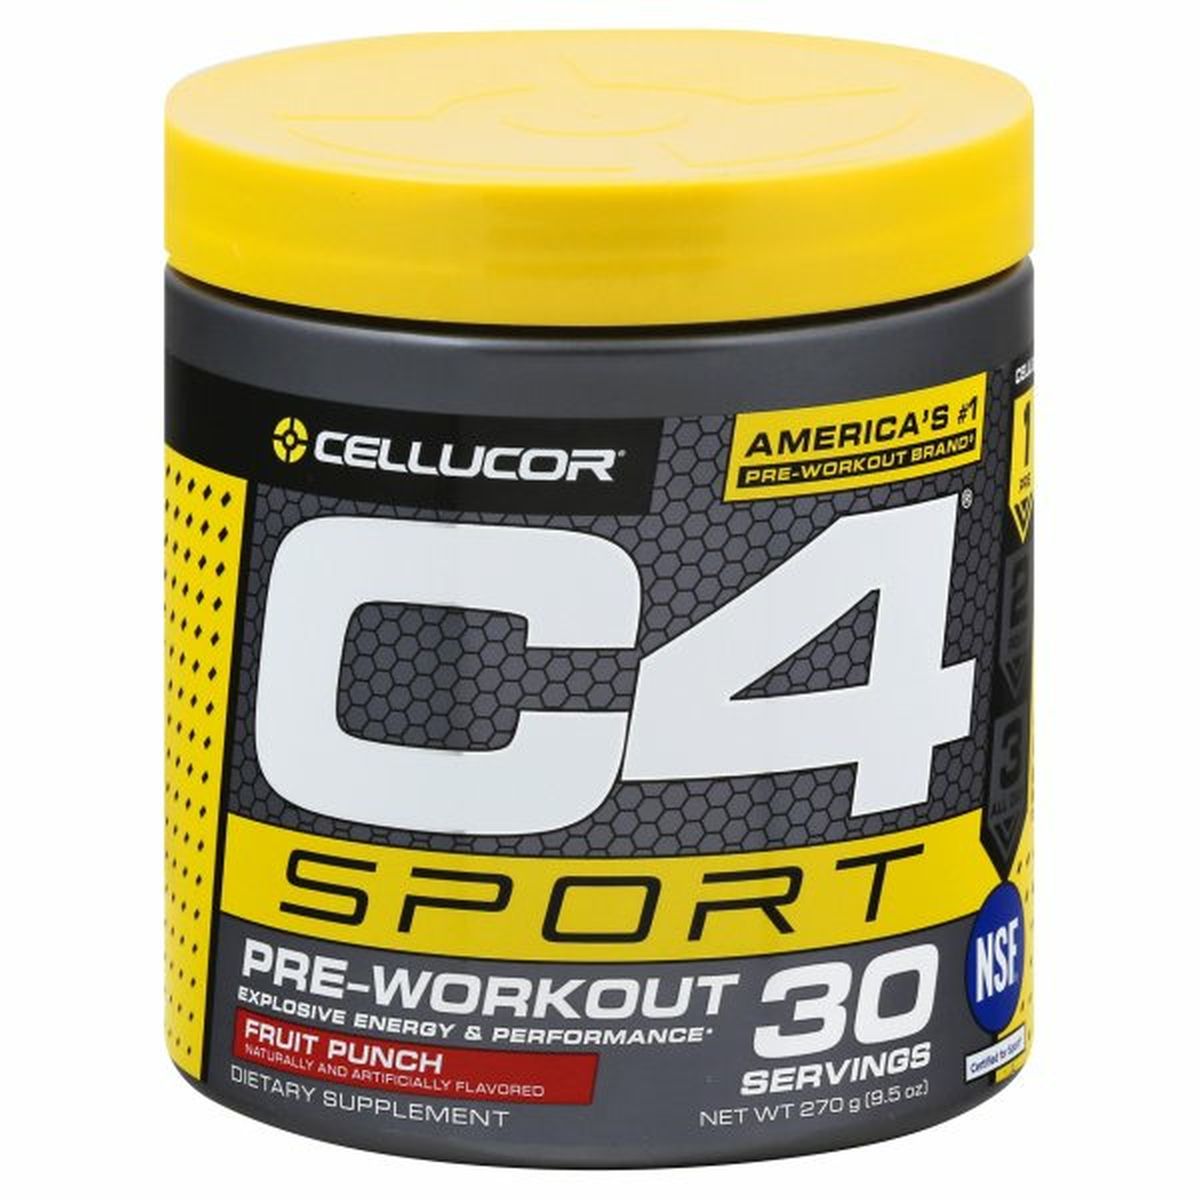 Calories in Cellucor Pre-Workout, C4 Sport, Fruit Punch